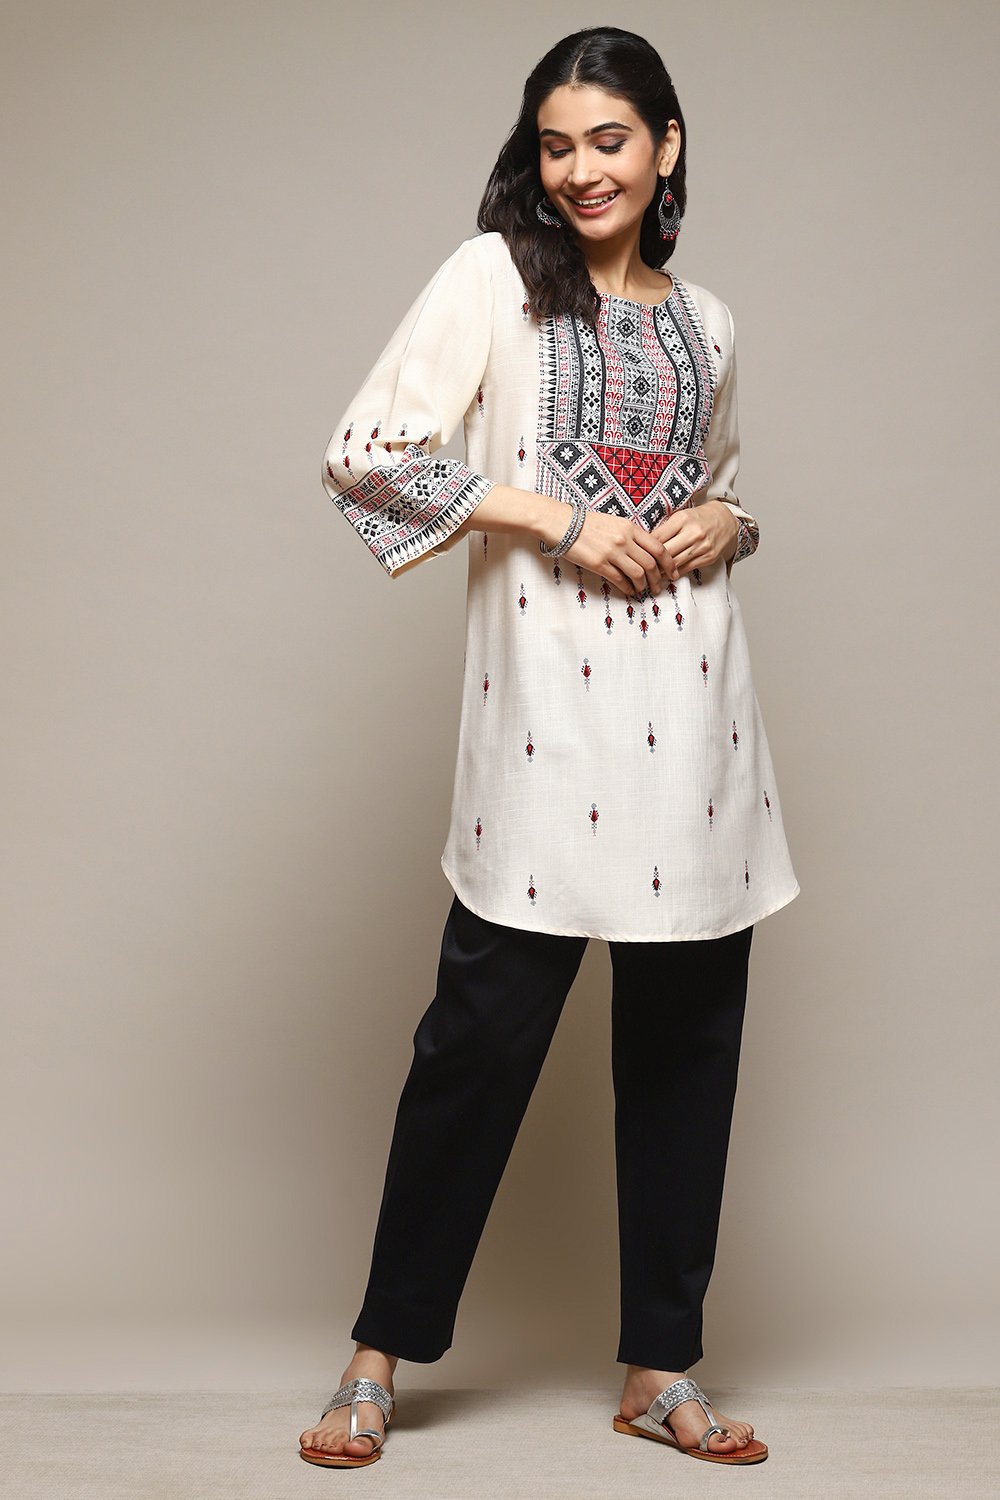 Details more than 151 wearing kurti with jeans best